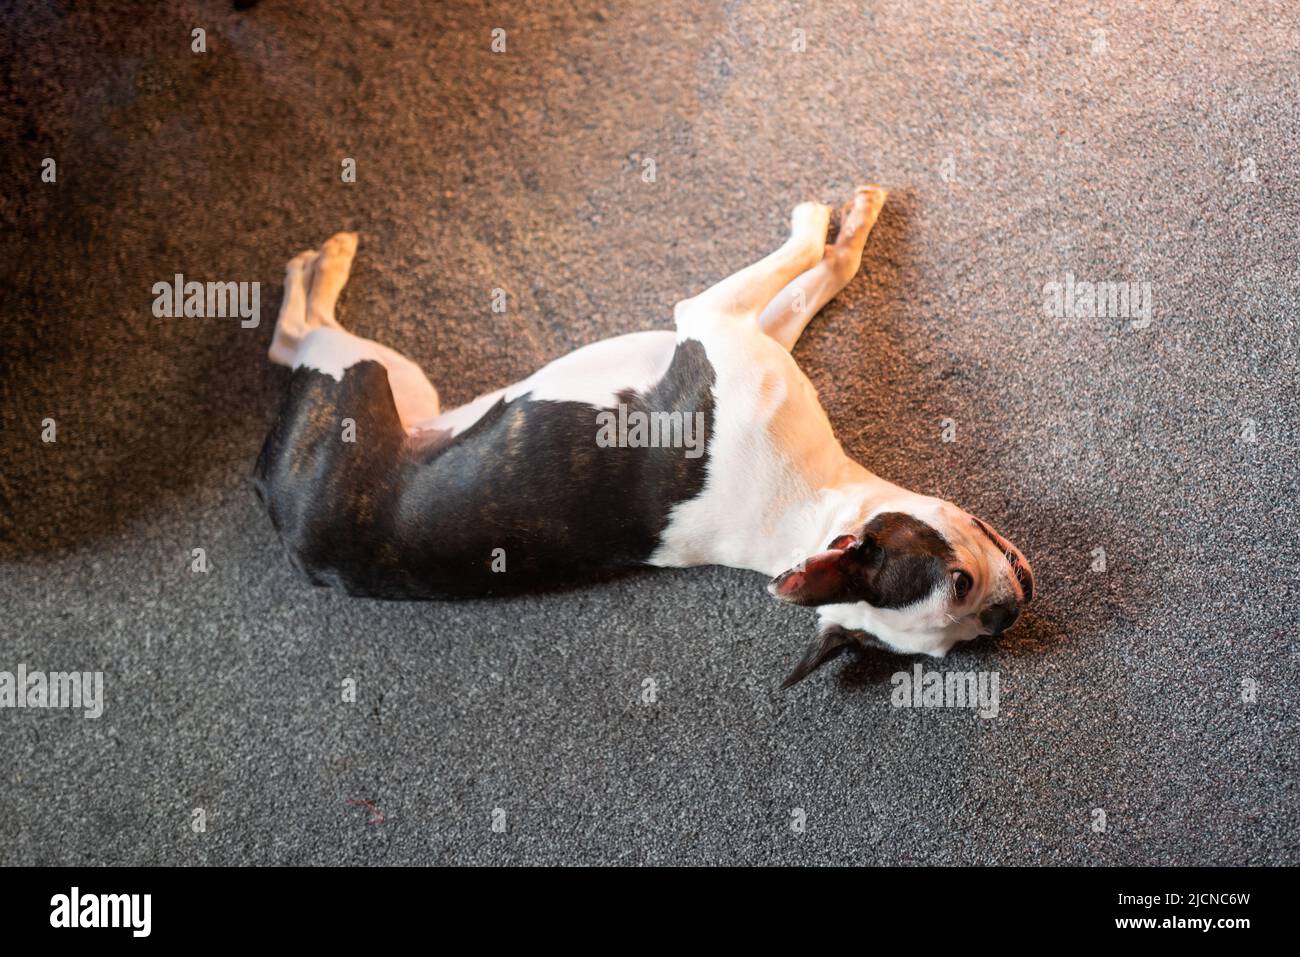 Young Boston Terrier dog lying on a grey carpet resting, seen from above. Stock Photo